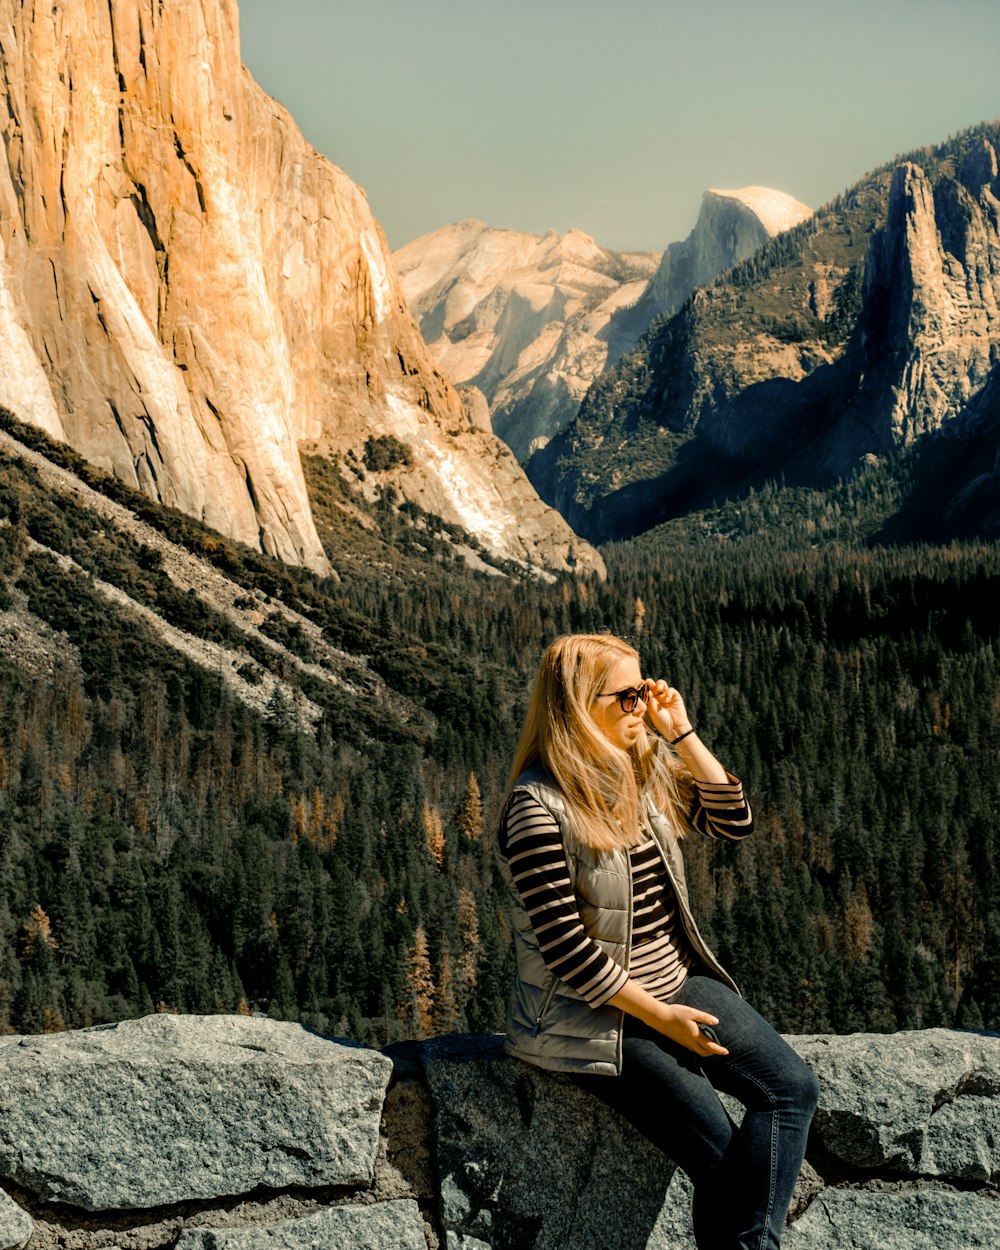 woman in black and white stripe long sleeve shirt sitting on rock formation during daytime